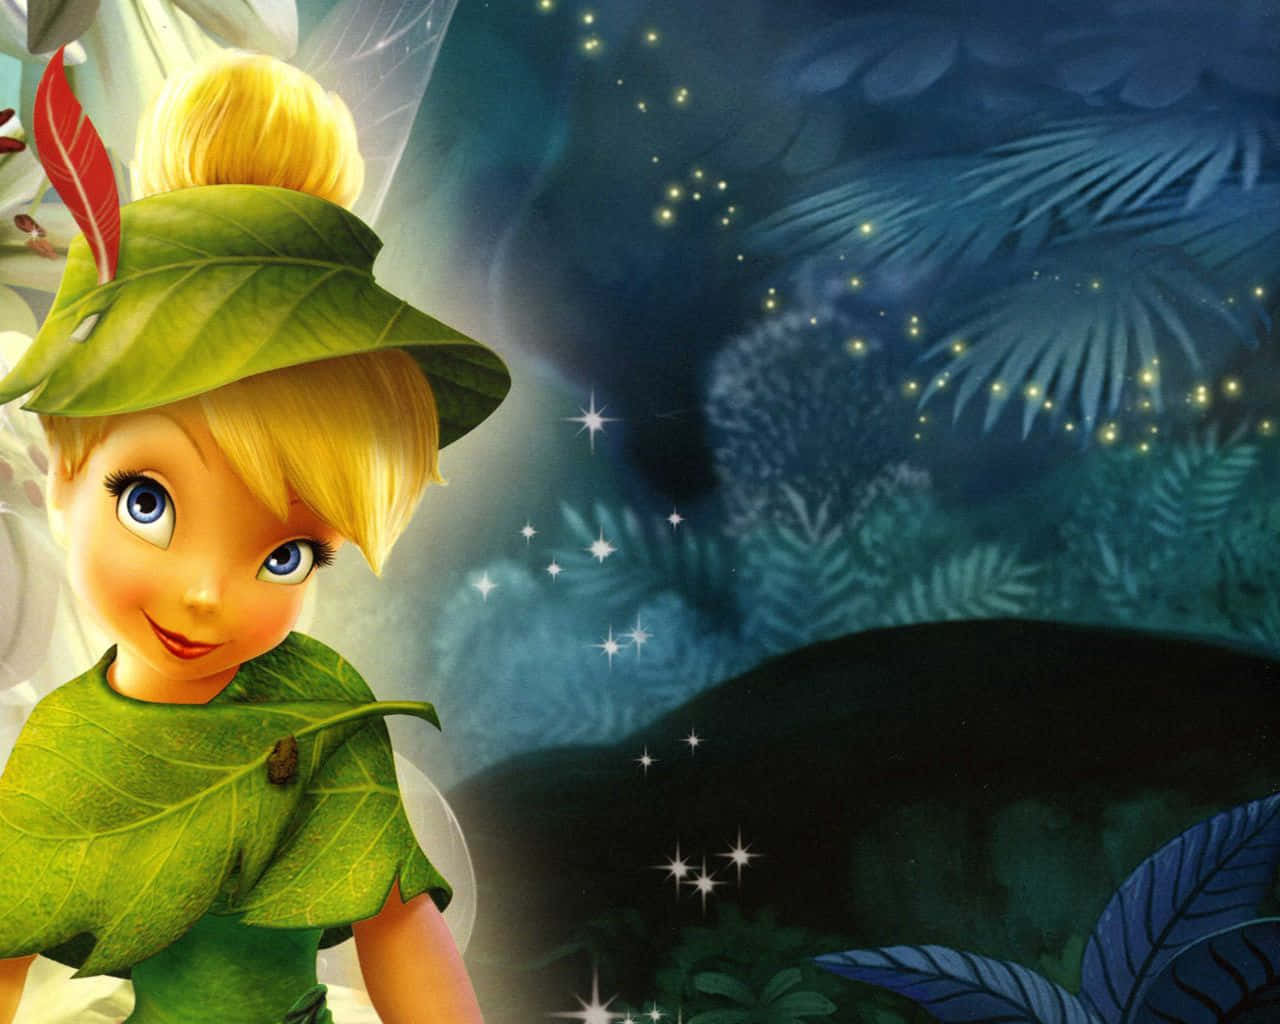 Magical Tinkerbell spreading pixie dust over a never-before-seen world